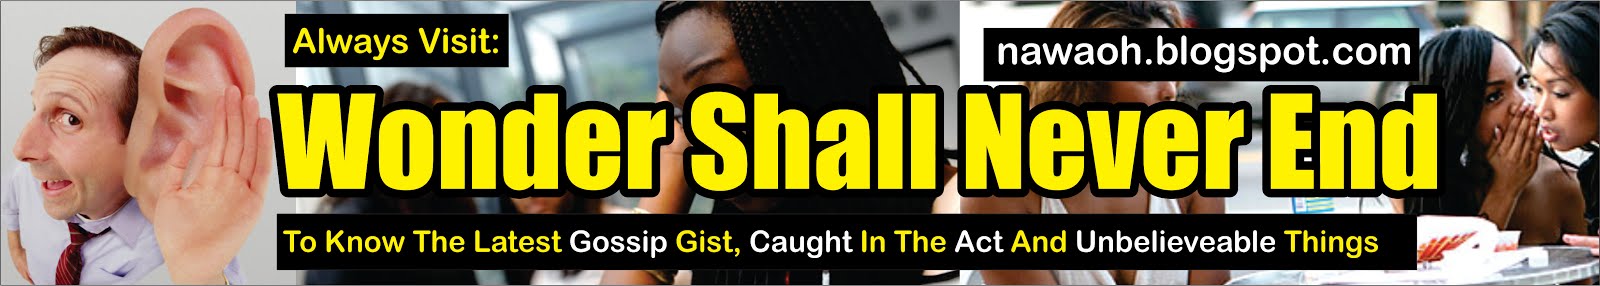 Wonder Shall Never End | Gossip Gist | Caught In The Act | Unbelievable 